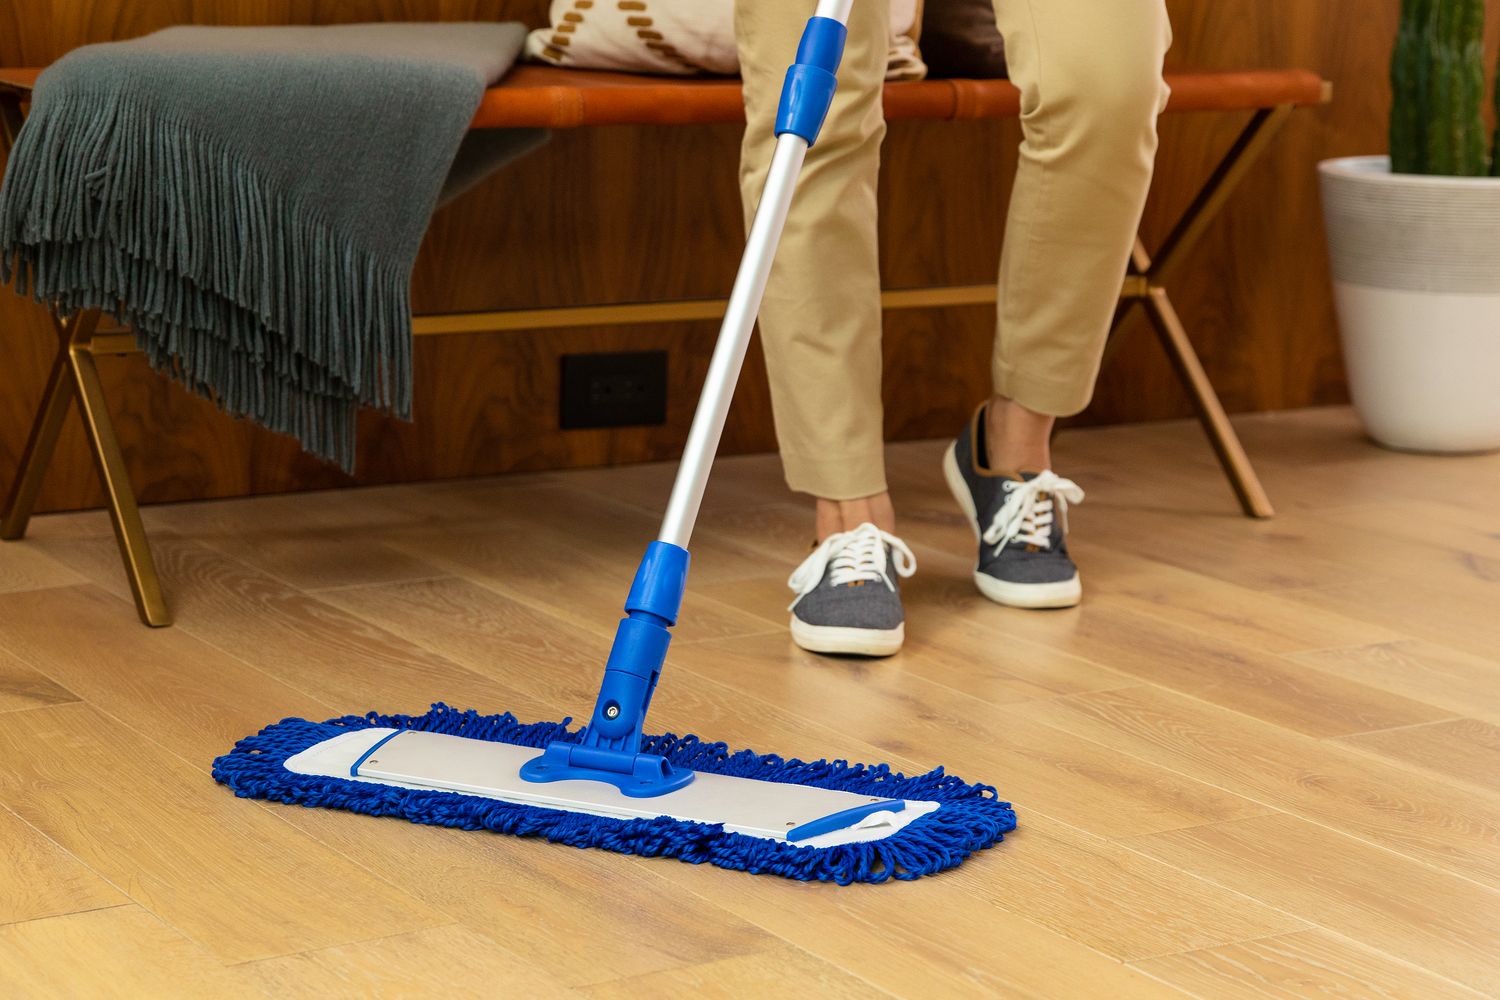 18 Professional Microfiber Mop System - Wet & Dust Mop Pads Included —  Microfiber Wholesale